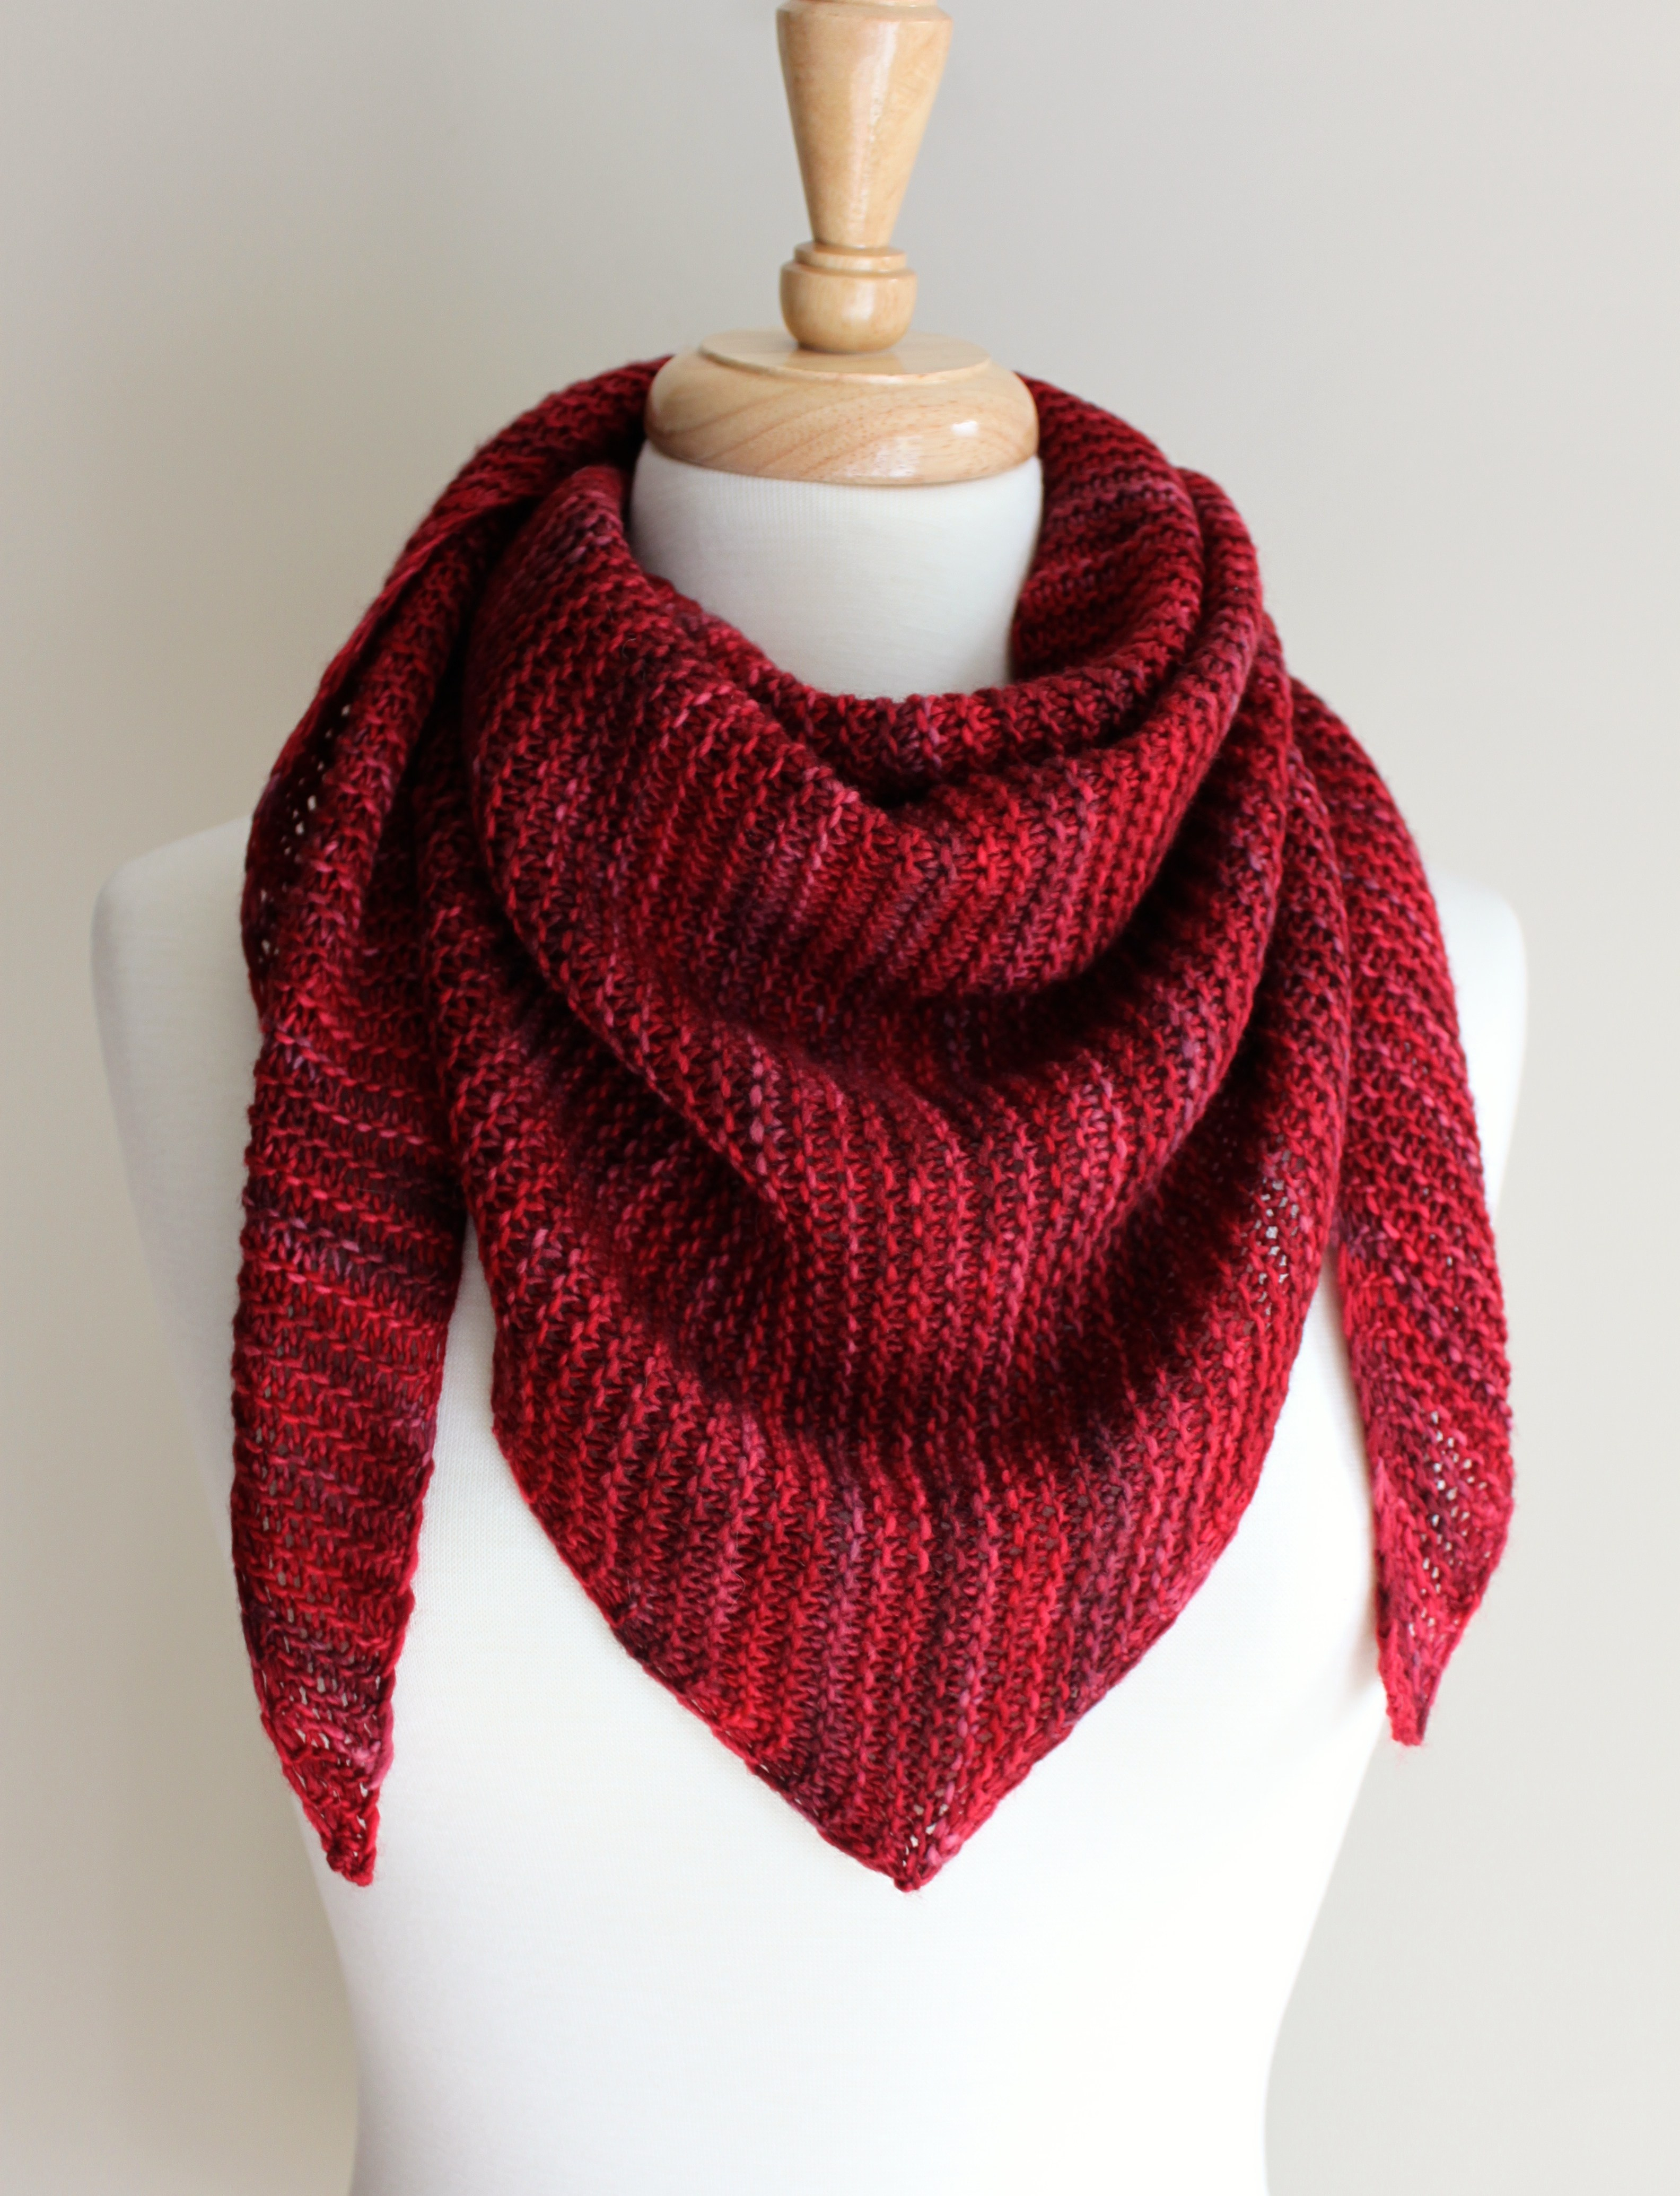 Knitting Scarf Pattern For Beginners Free Free Knitting Patterns Truly Triangular Scarf Leah Michelle Designs